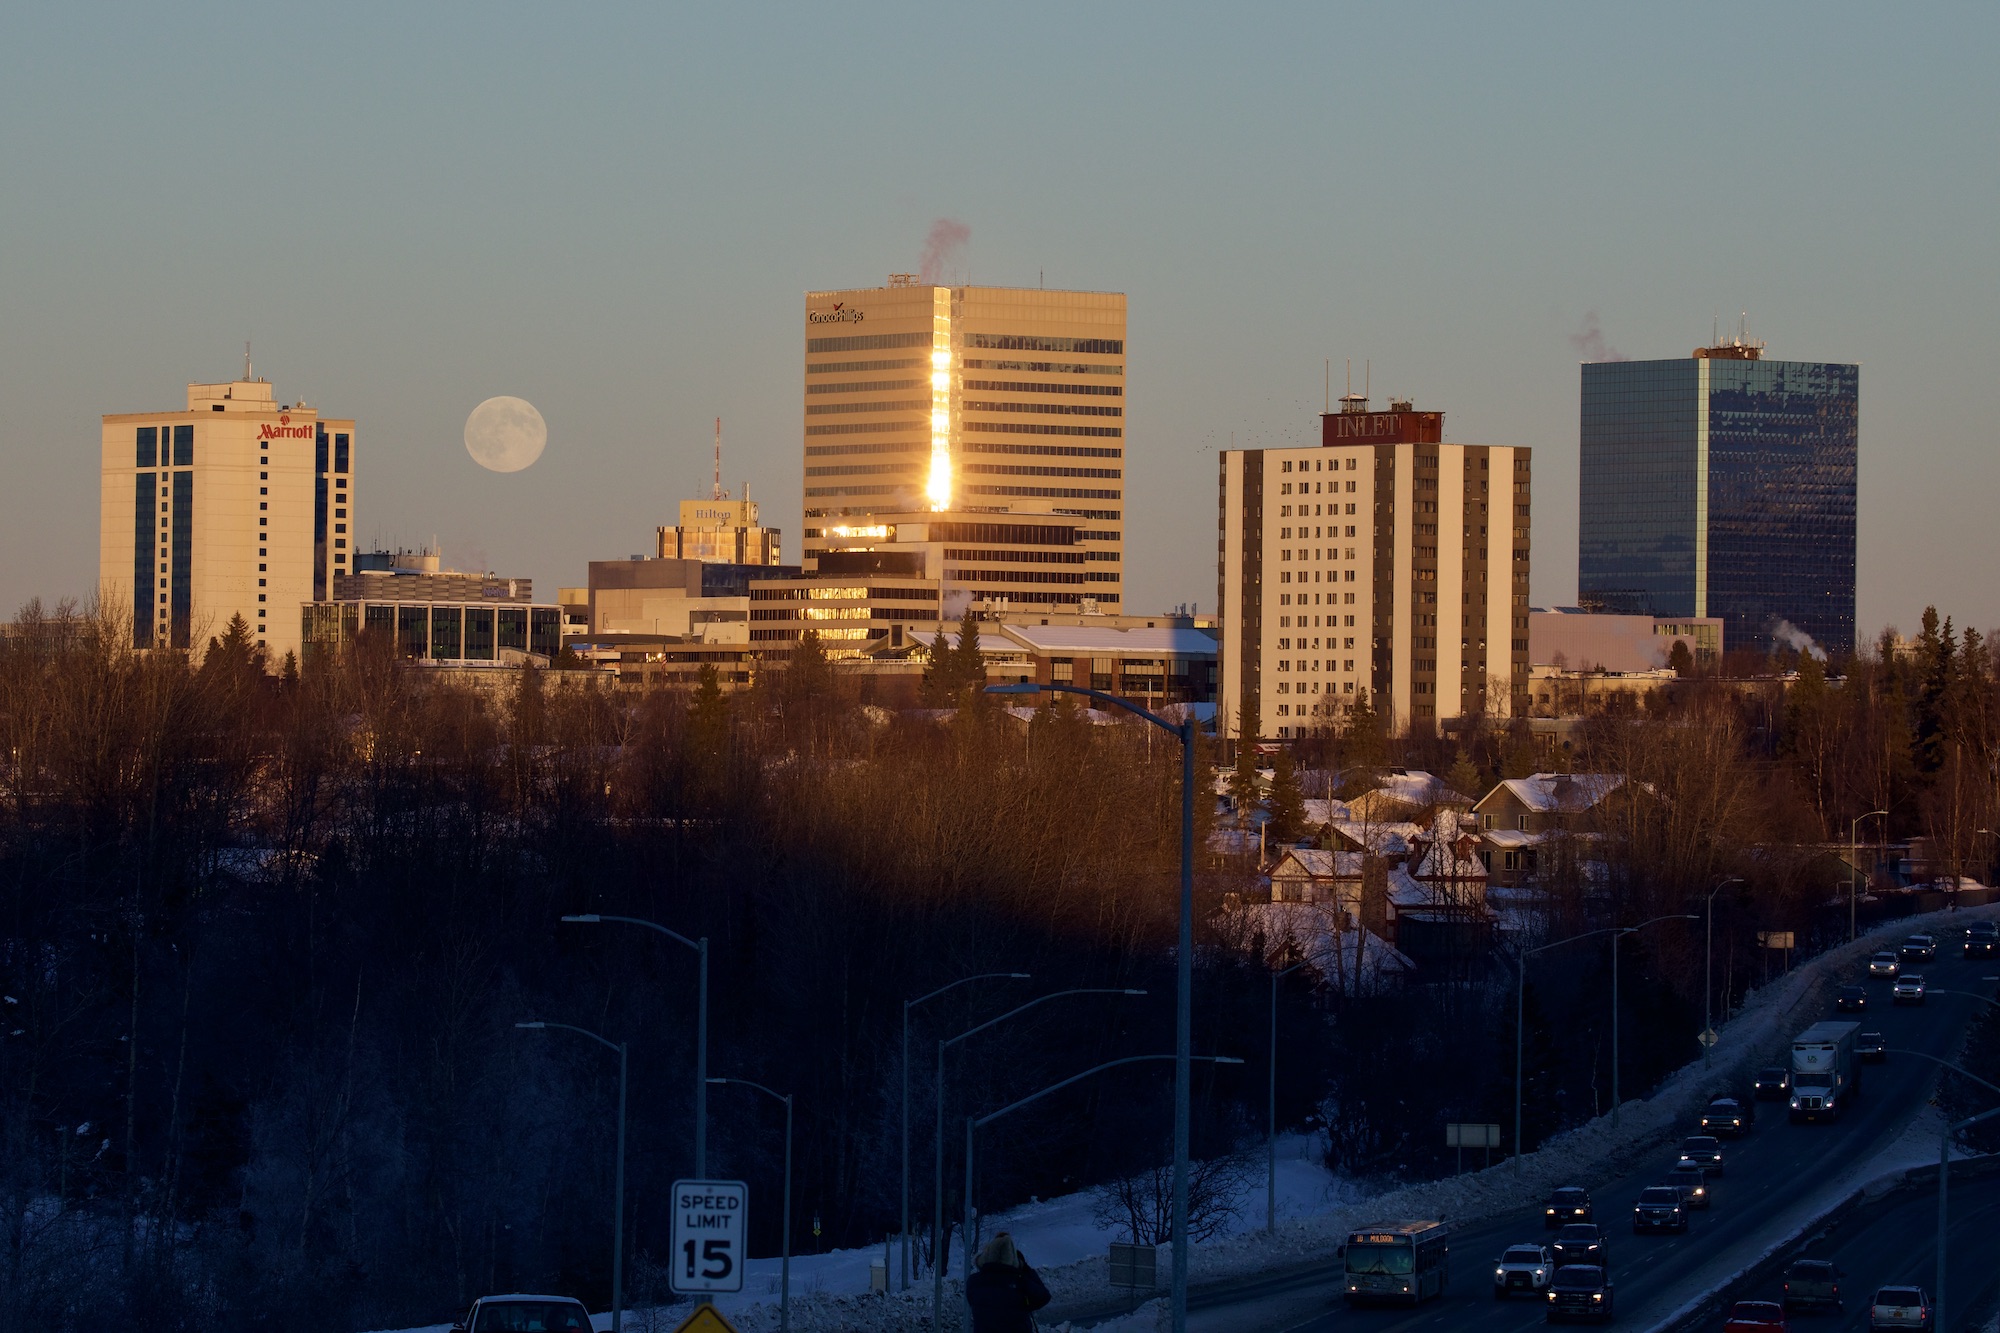 The moon rises above a collection of tall buildings.